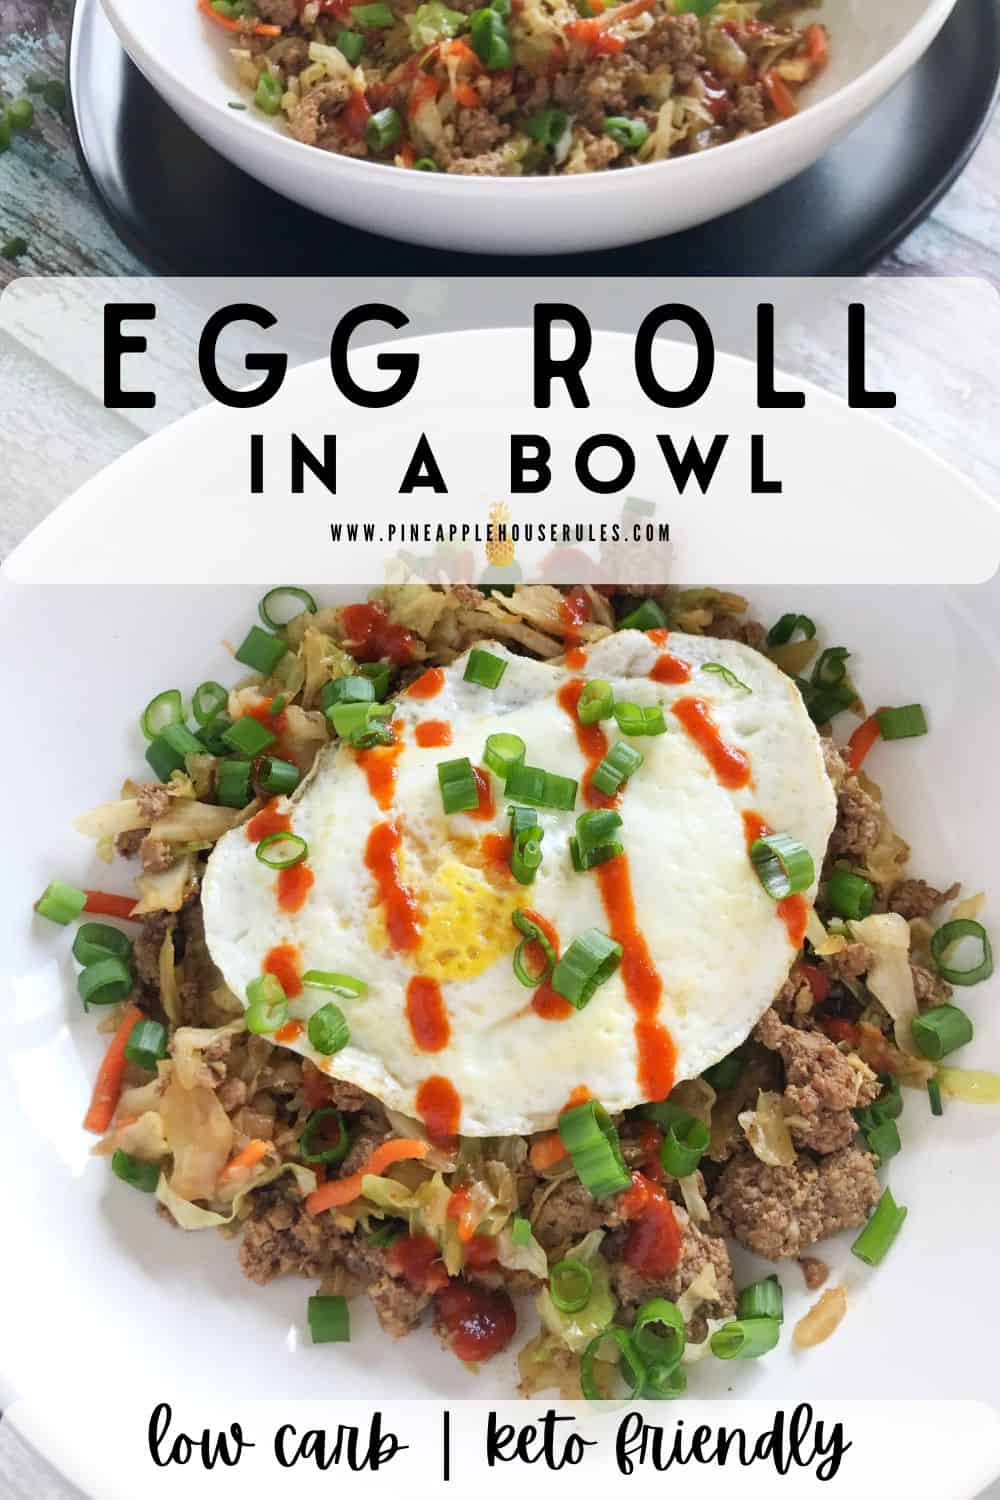 This Egg Roll in a Bowl is basically a deconstructed egg roll (minus the actual roll part). It’s low carb, easy to make, takes just minute to make, and is crazy delicious! Egg Roll in a Bowl | Egg Roll in a Bowl Recipe | Egg Roll in a Bowl Keto | Egg Roll in a Bowl Healthy | Egg Roll in a Bowl Weight Watchers | Egg Roll in a Bowl Easy | Egg Roll in a Bowl Low Carb | Egg Roll in a Bowl Optavia | Egg Roll in a Bowl Whole 30 | Ground Beef Recipes | Low Carb Recipes | Low Carb Meals | Keto Recipes